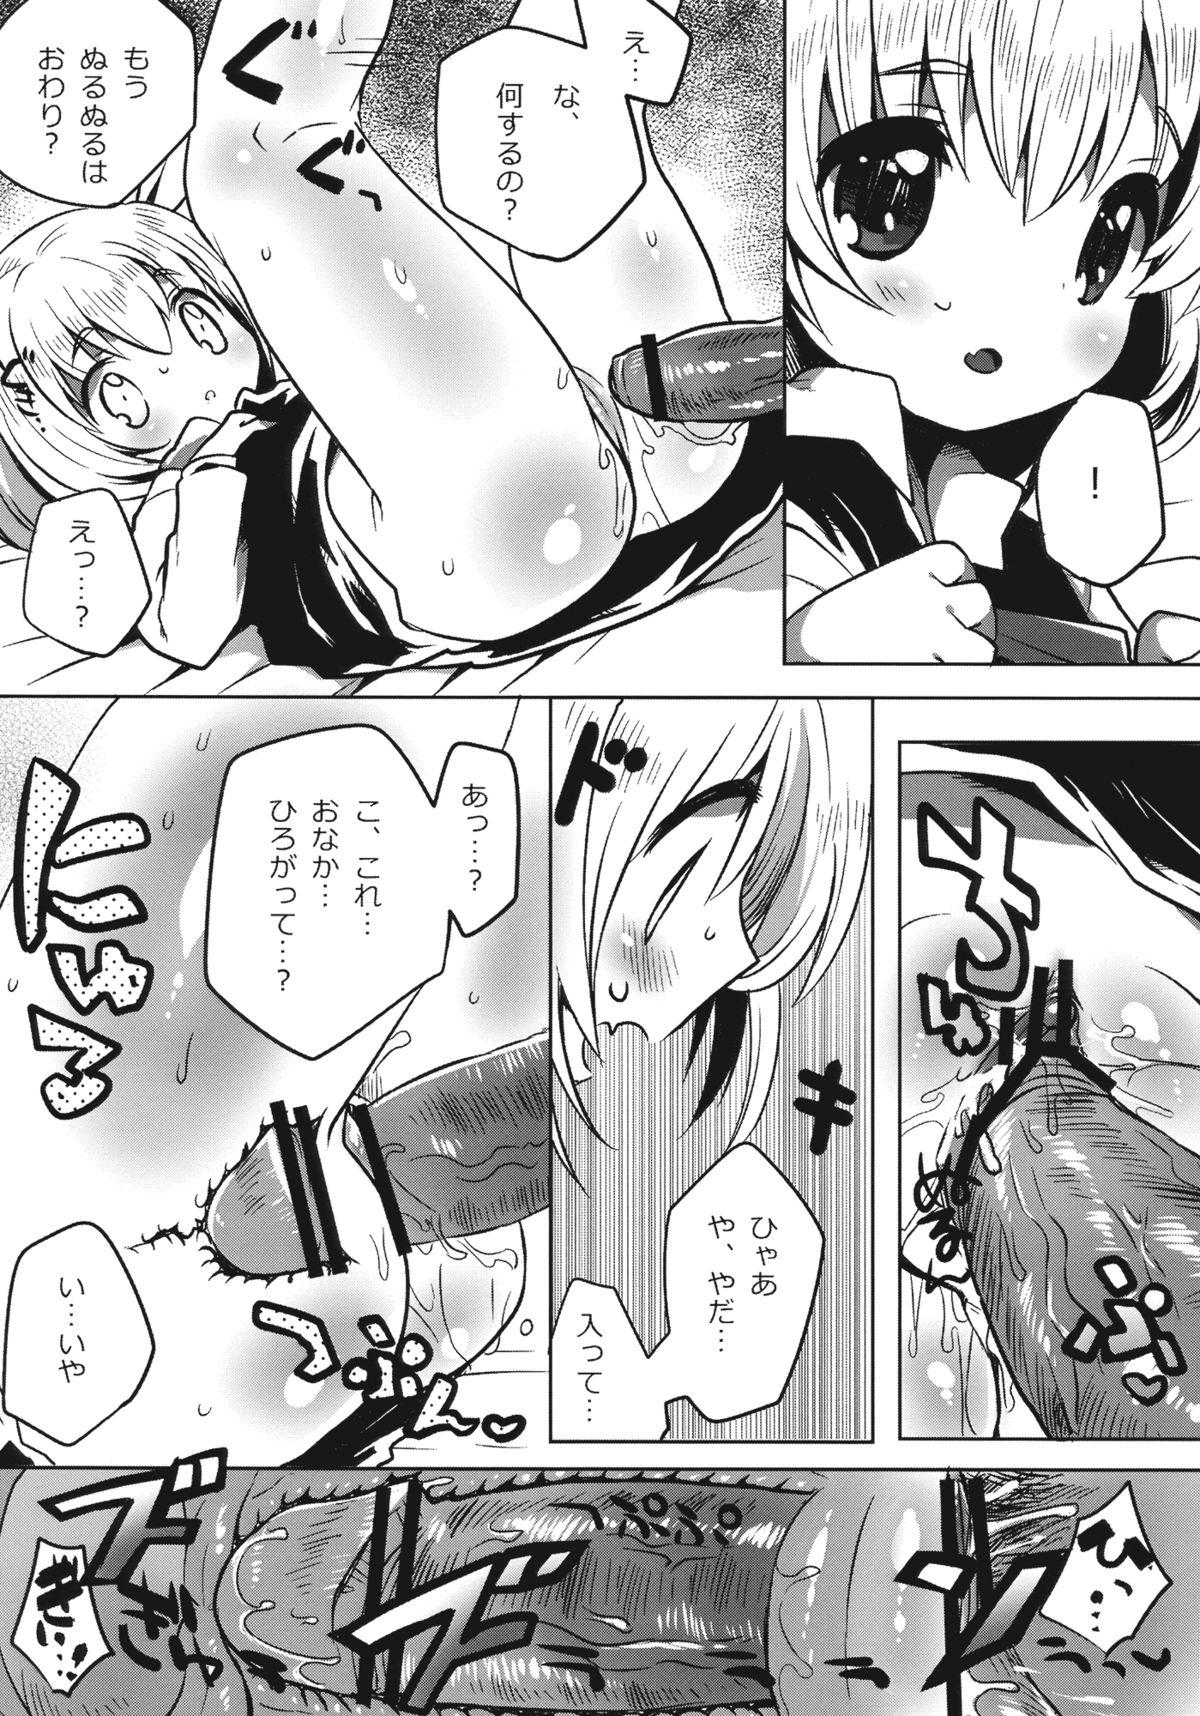 Hood Swallowtail Eclipse - Touhou project Feet - Page 8